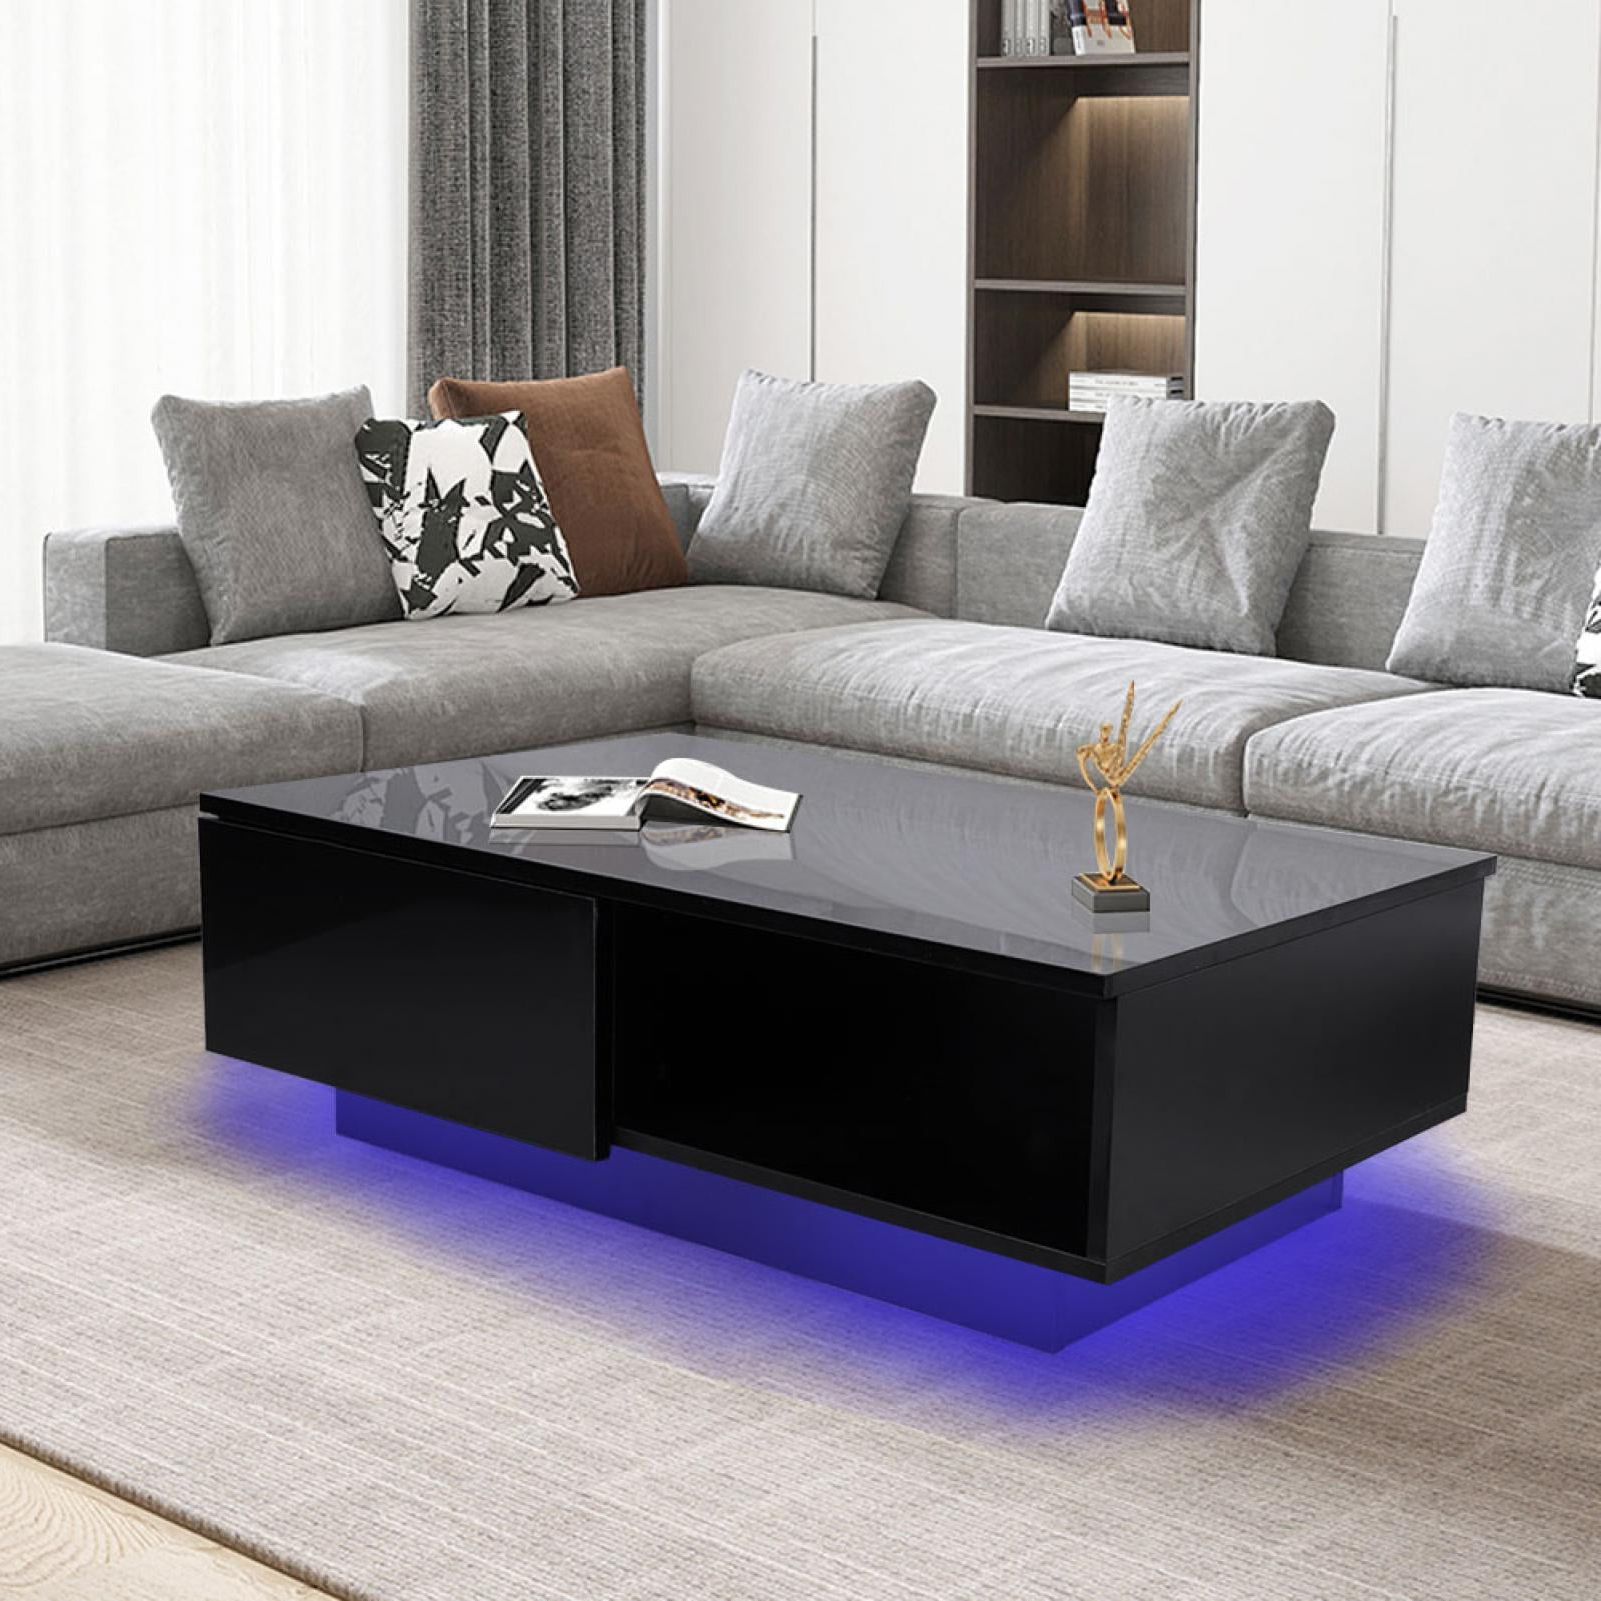 Led Coffee Tables With 4 Drawers Regarding Latest Ebtools Rectangle Led Coffee Table, Black Modern High Gloss Furniture (View 12 of 15)